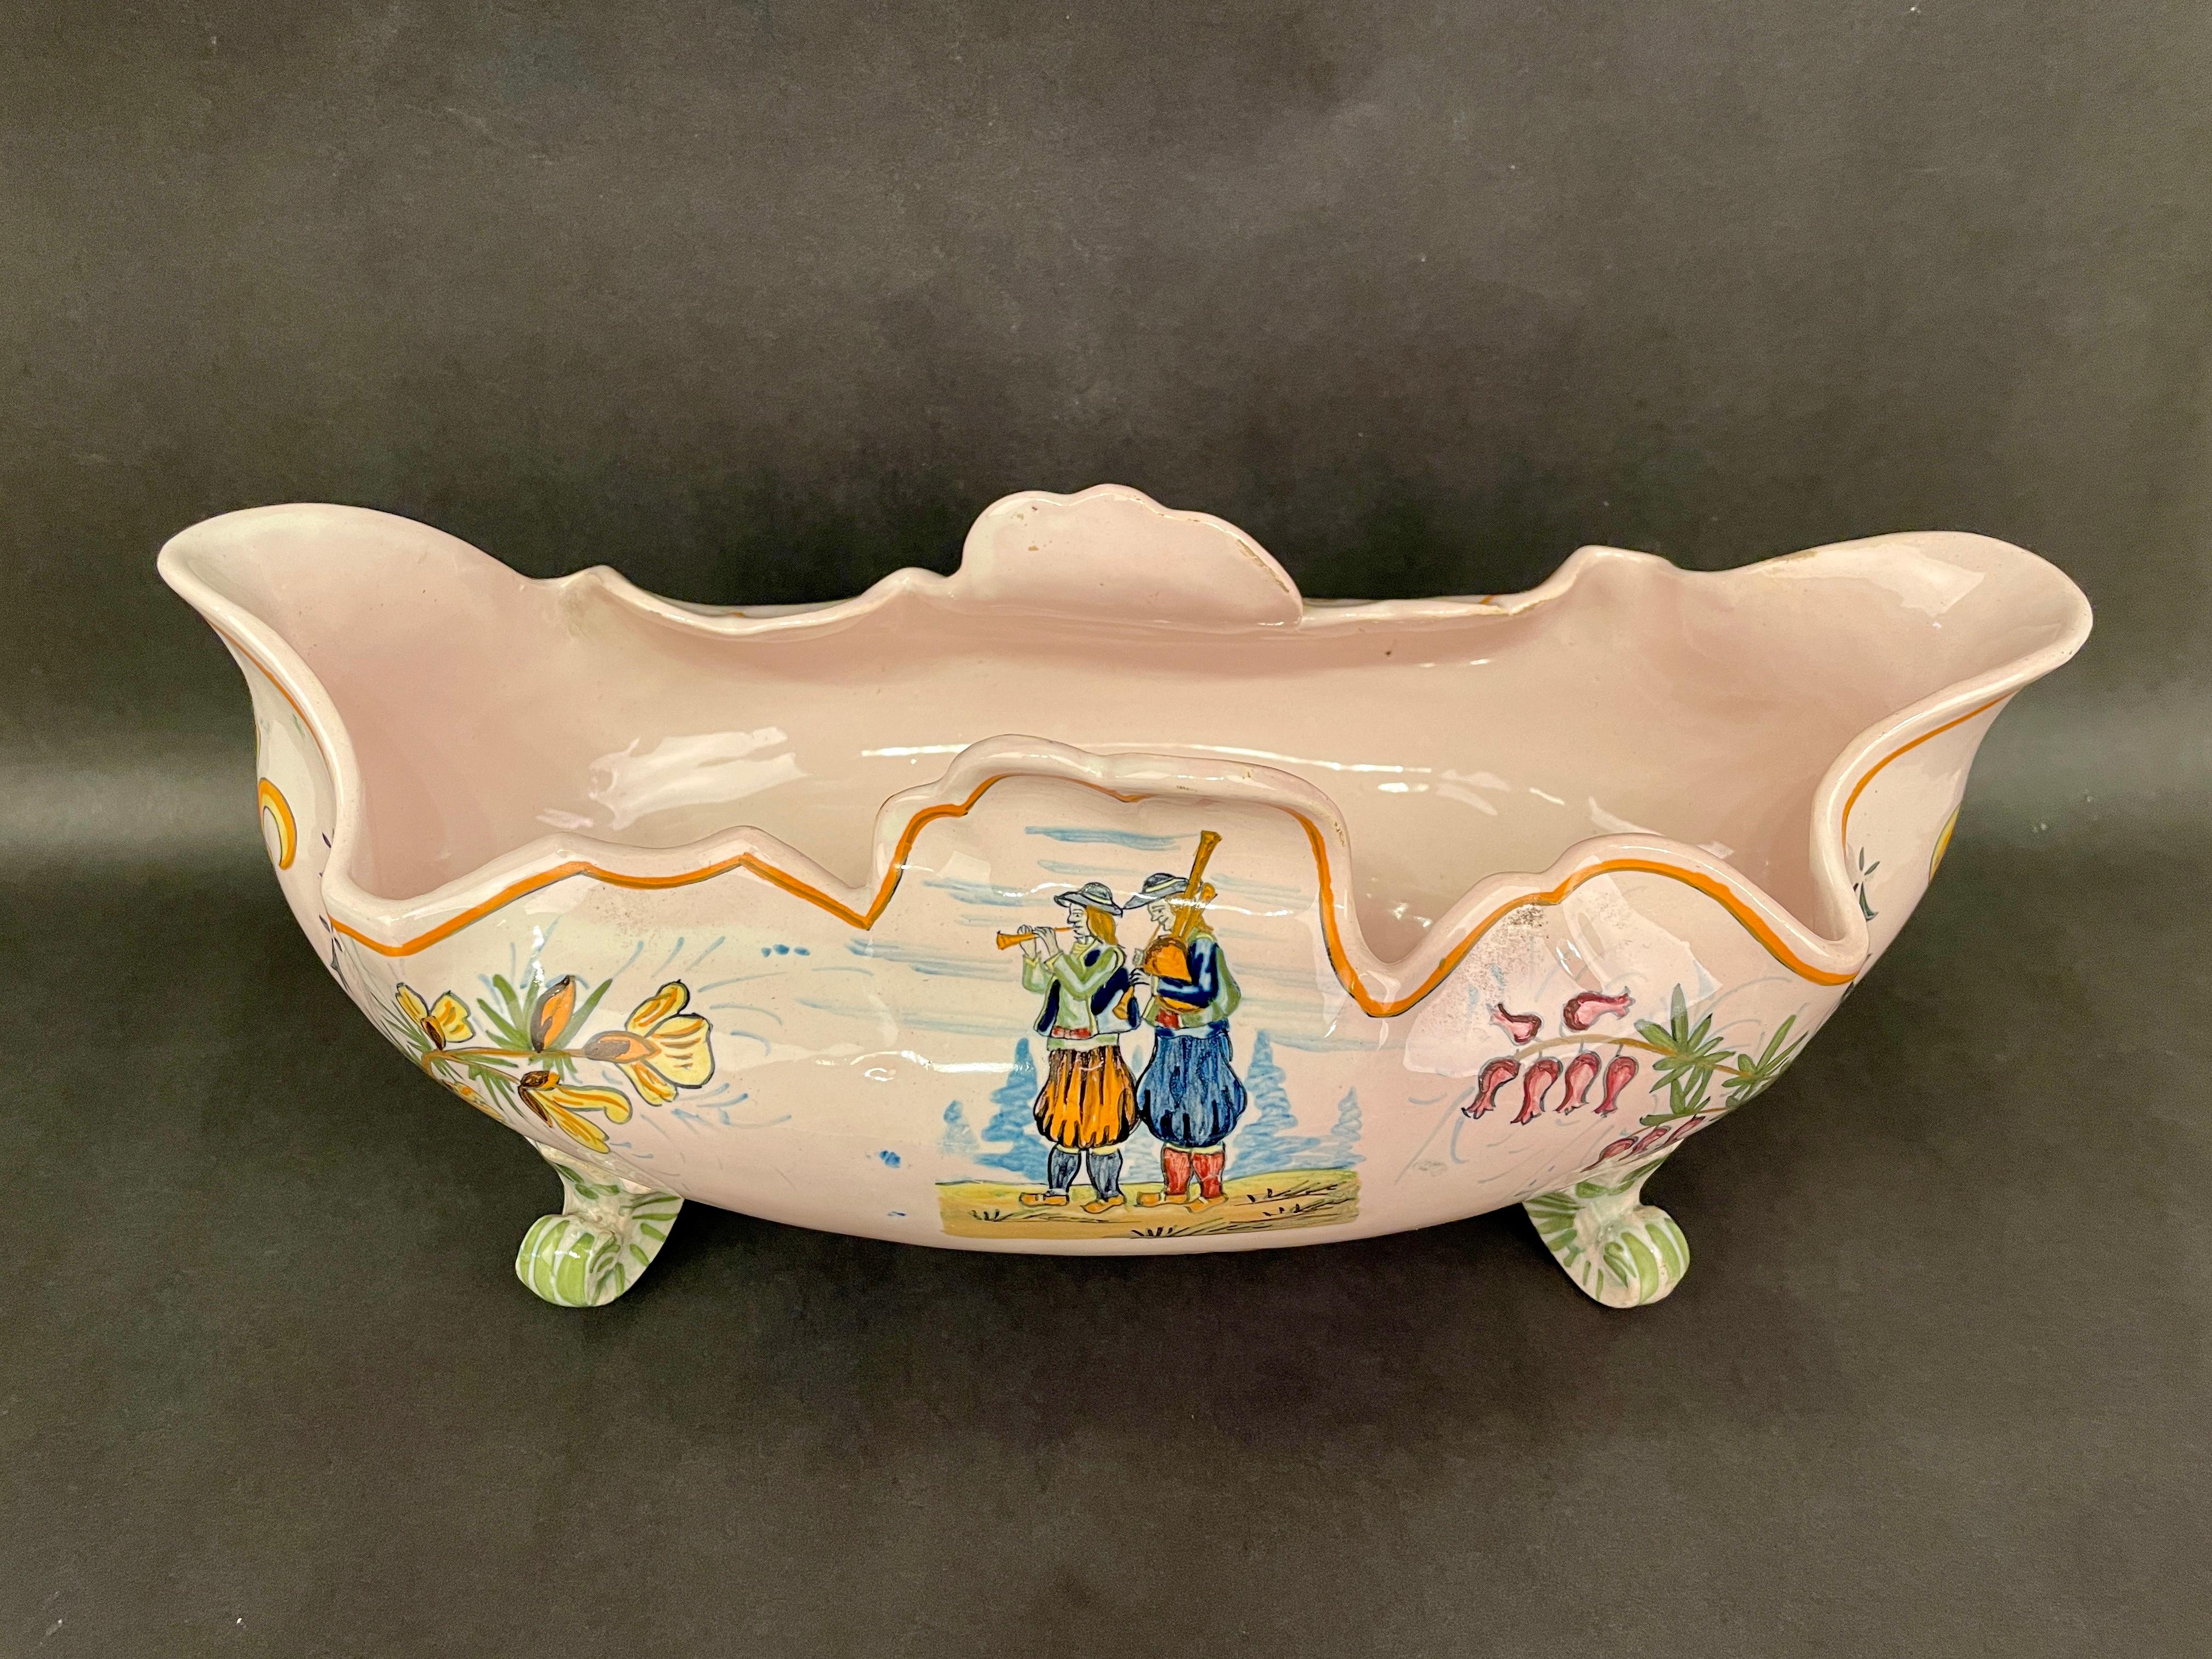 A good faience jardiniere from Henriot Quimper, depicting two musicians on one side and the coat of arms of Bretagne on the other with a fleur de lis on each end. In good condition with minor wear. No repairs or chips. Circa 1920-1930
12.5